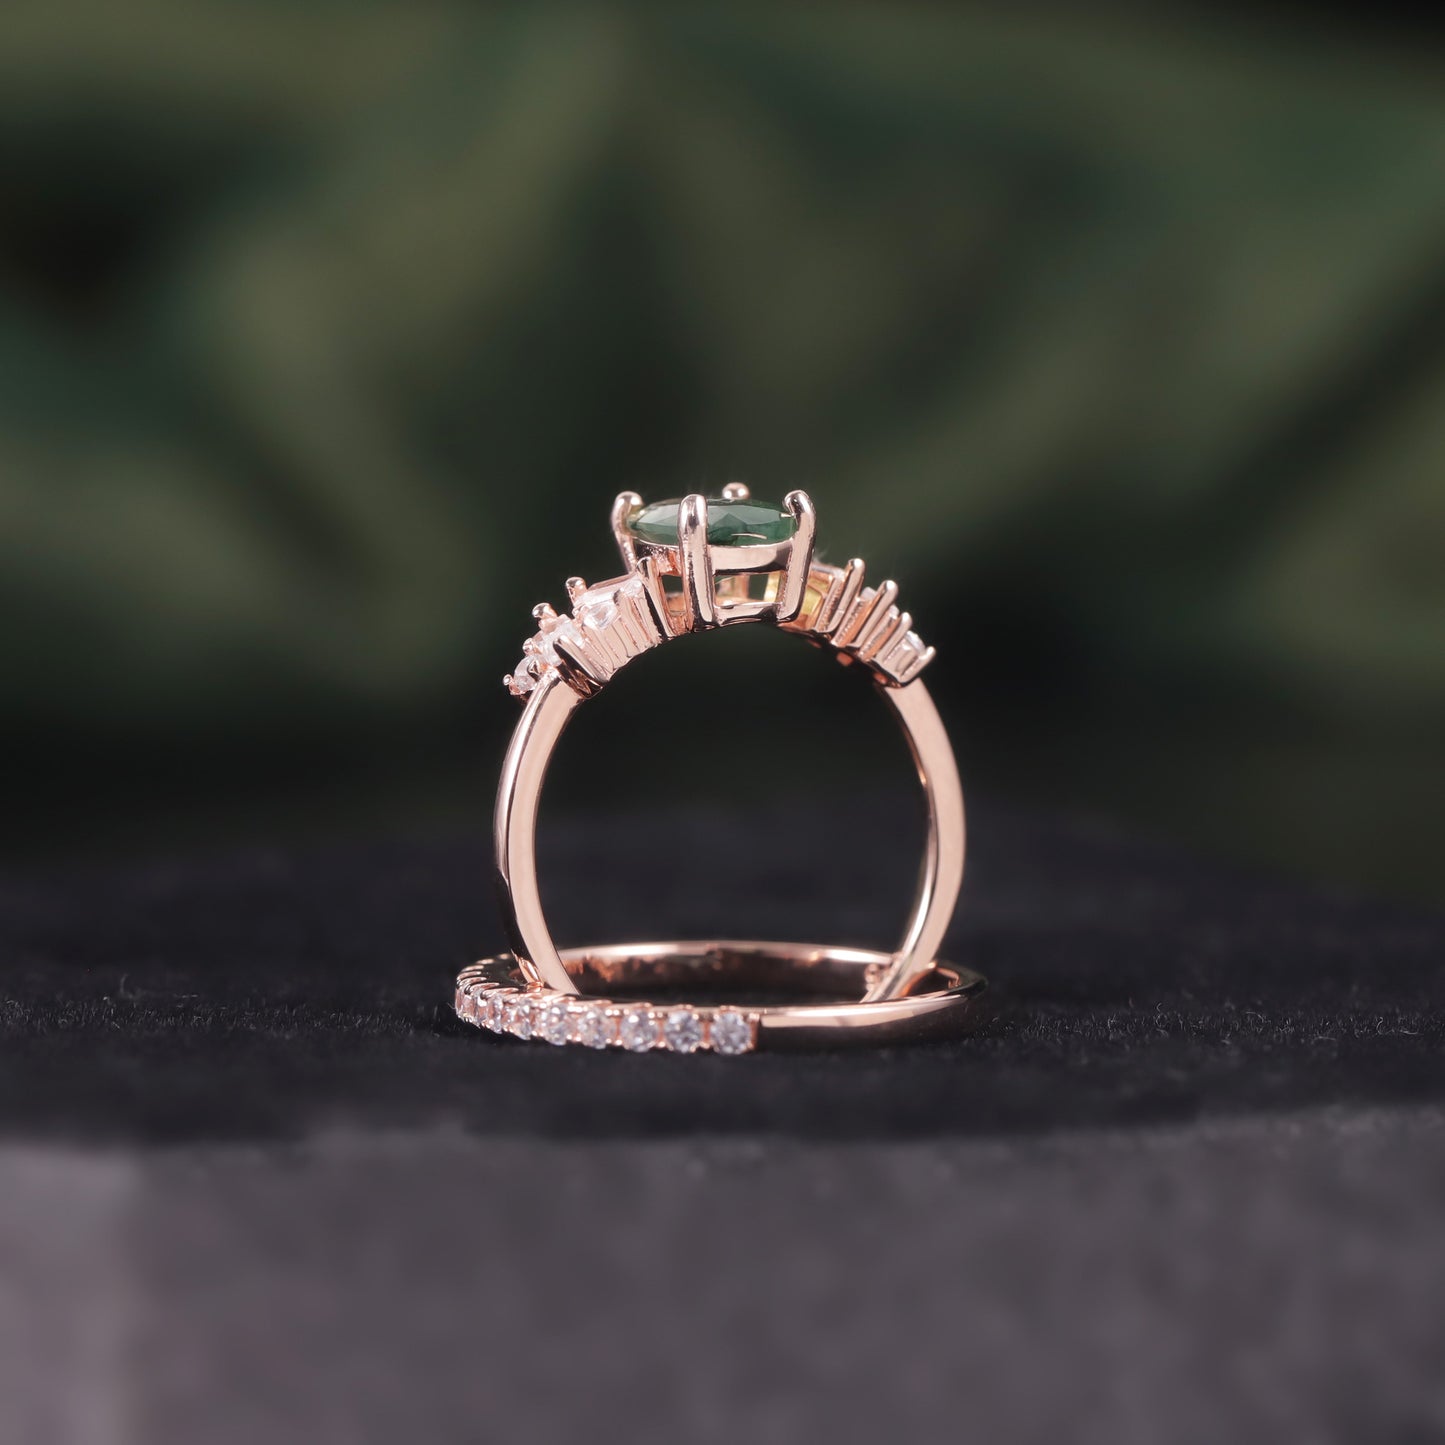 Oval Style Unique Design Moss Agate Engagement Ring